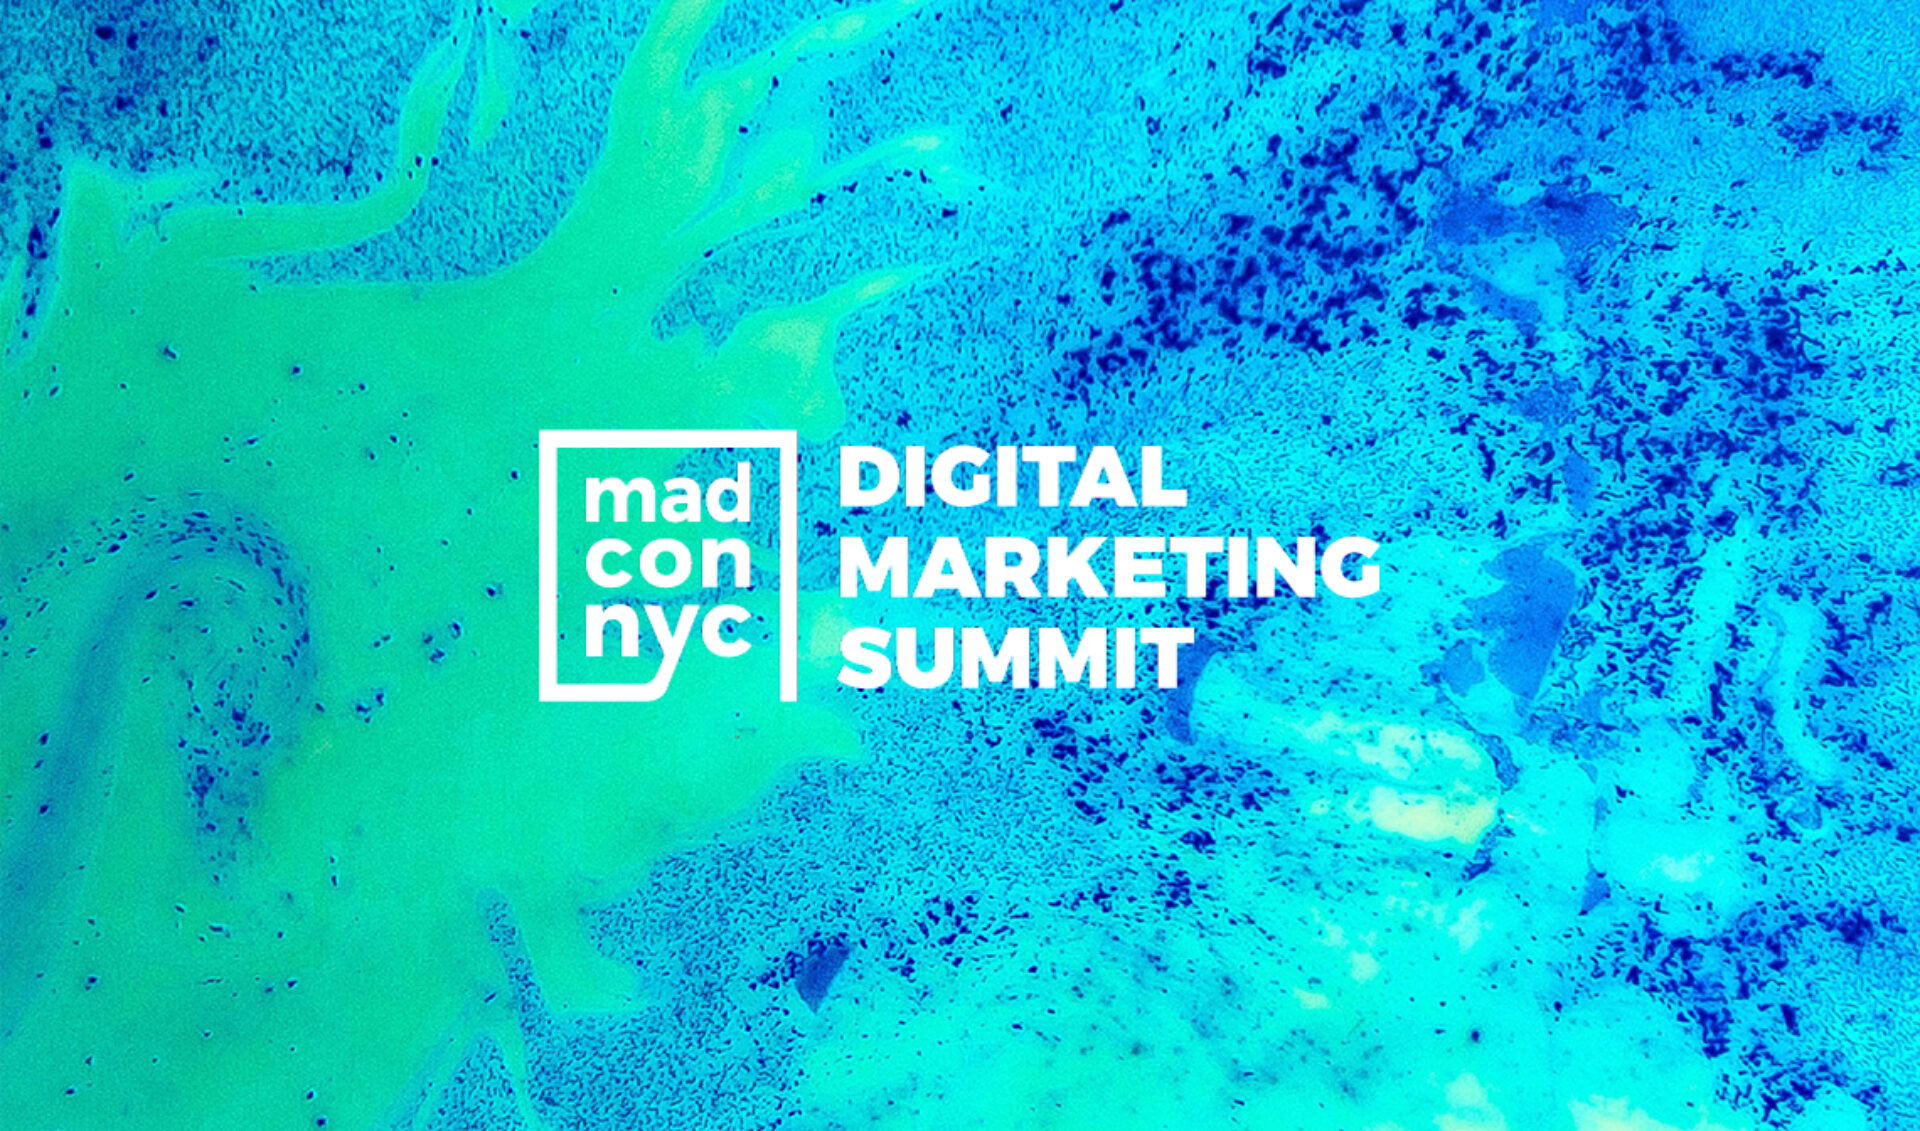 Five Must-Have Experiences At Digital Marketing Confab madconNYC